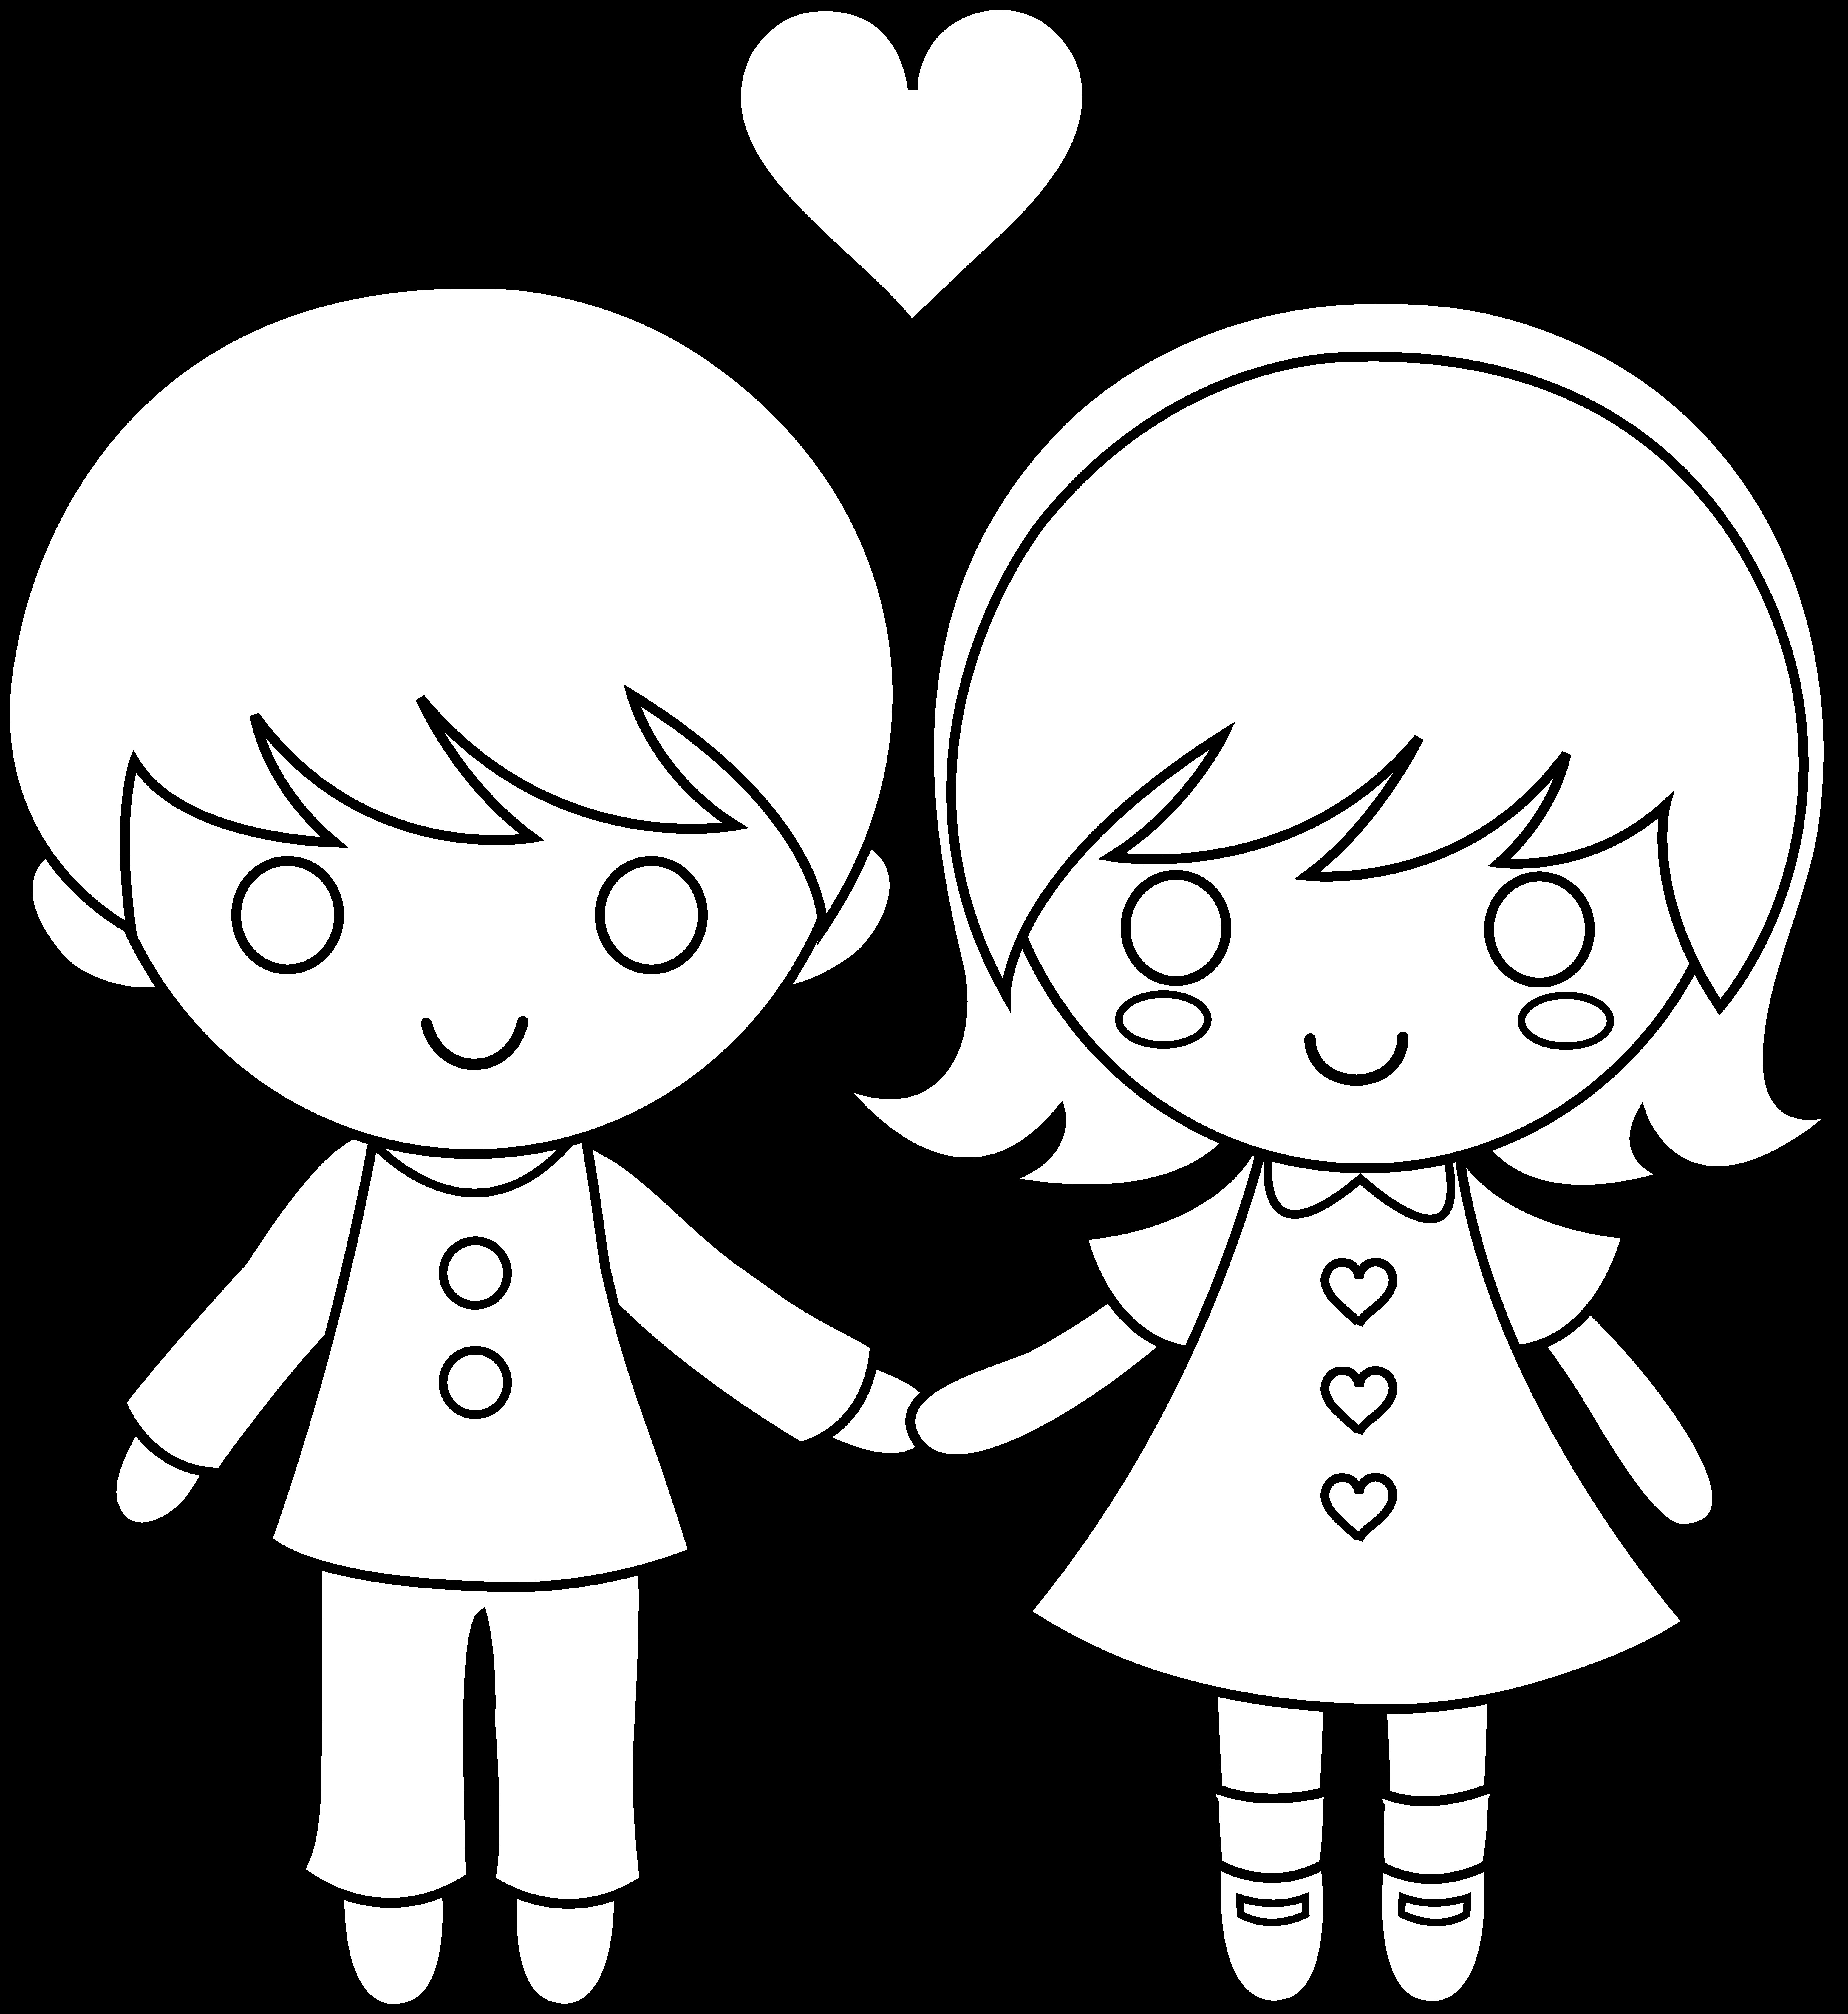 Printable Cute Coloring Pages For Boys
 Cute Little Girls Coloring Pages AZ Coloring Pages